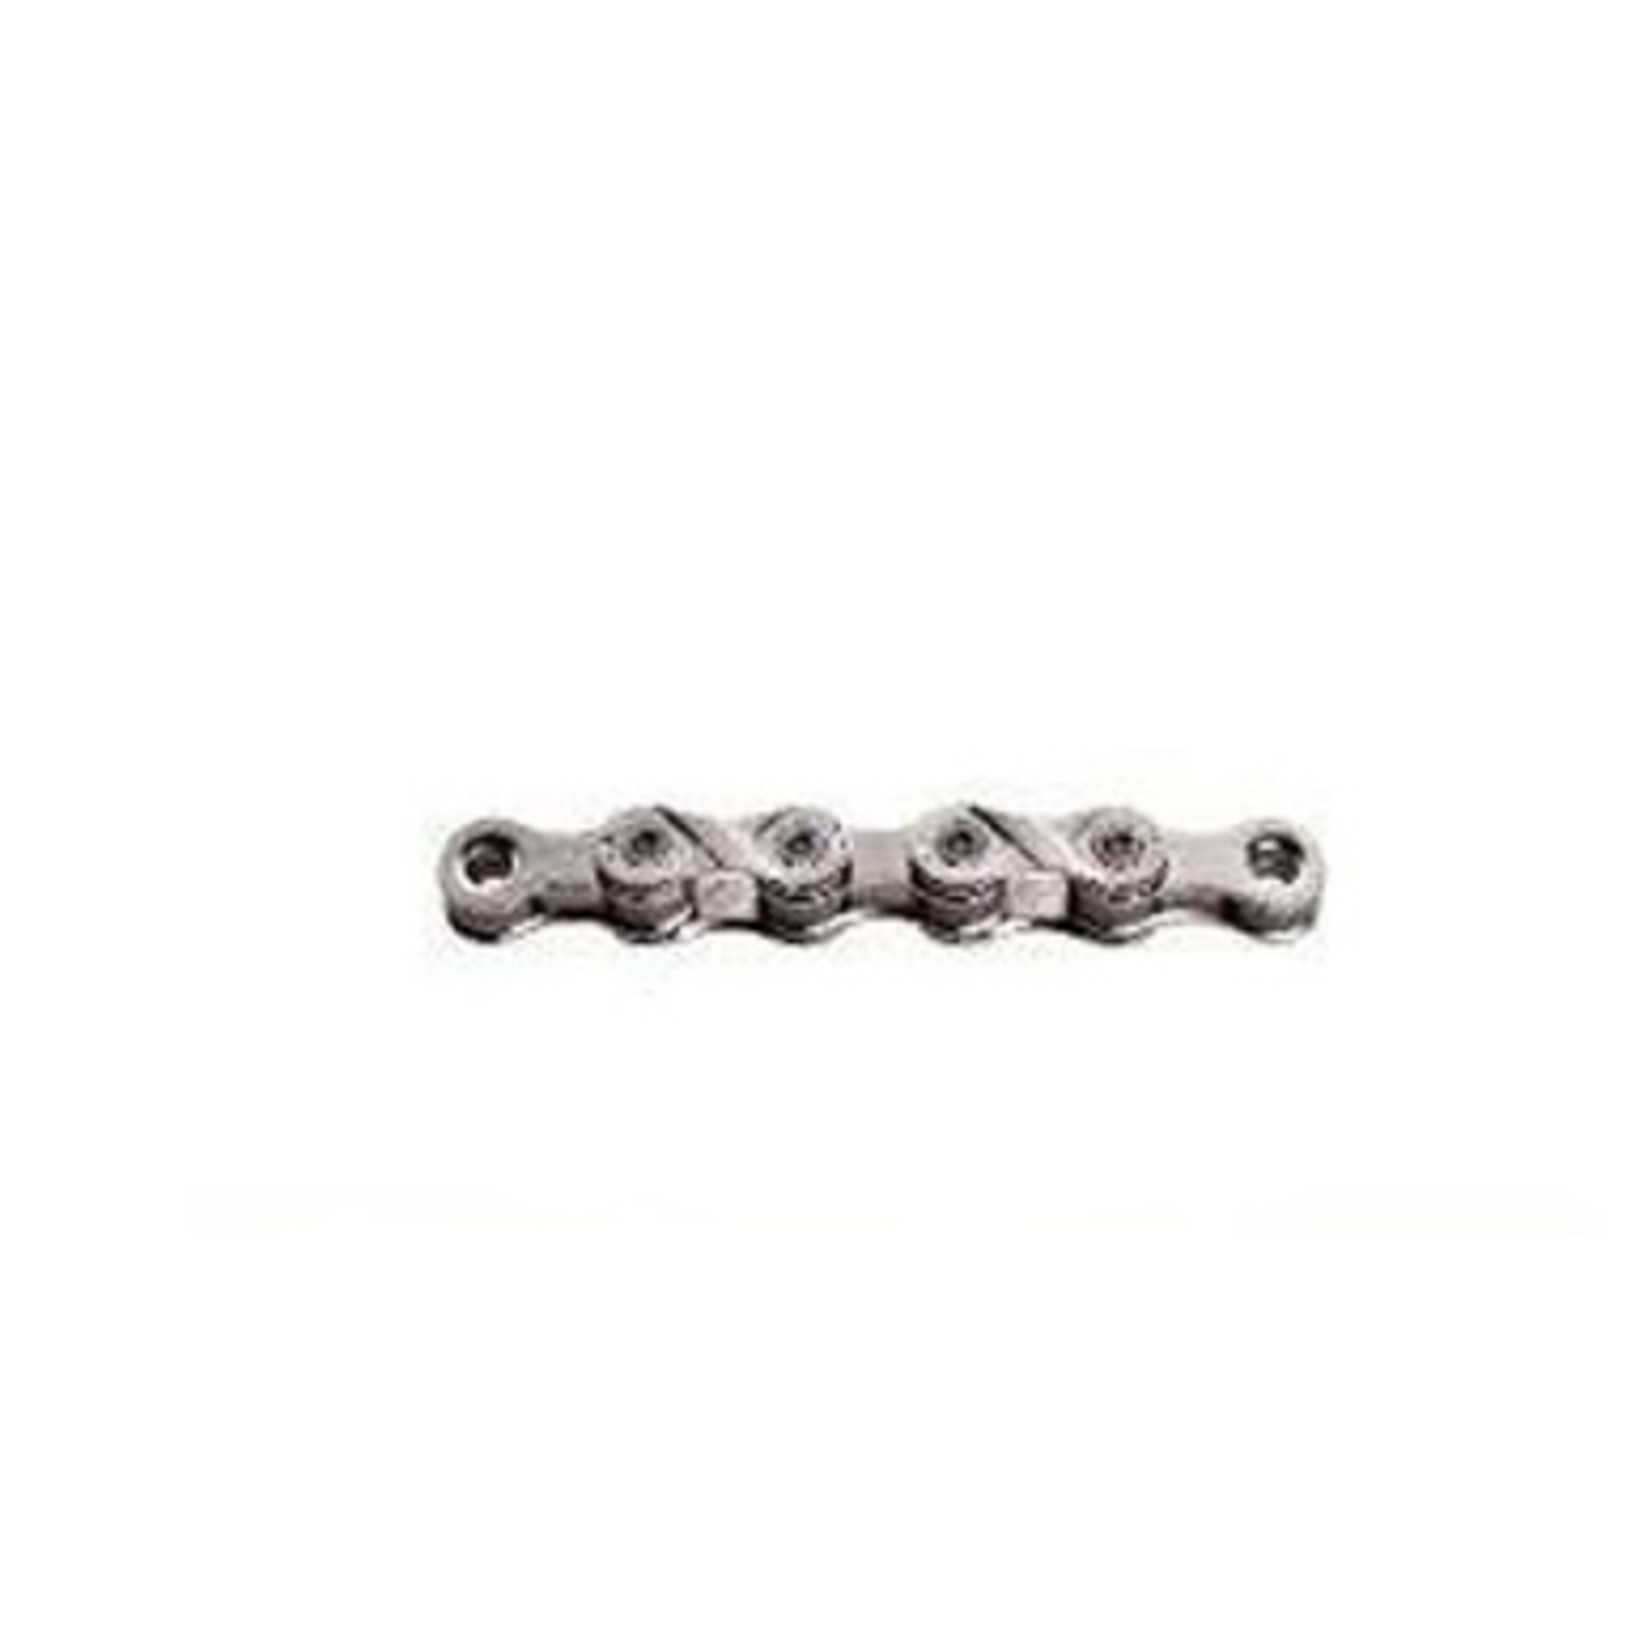 KMC KMC Bike Chain - X8 - 1/2" X 3/32" X 116 Links With Connector - Silver/Silver